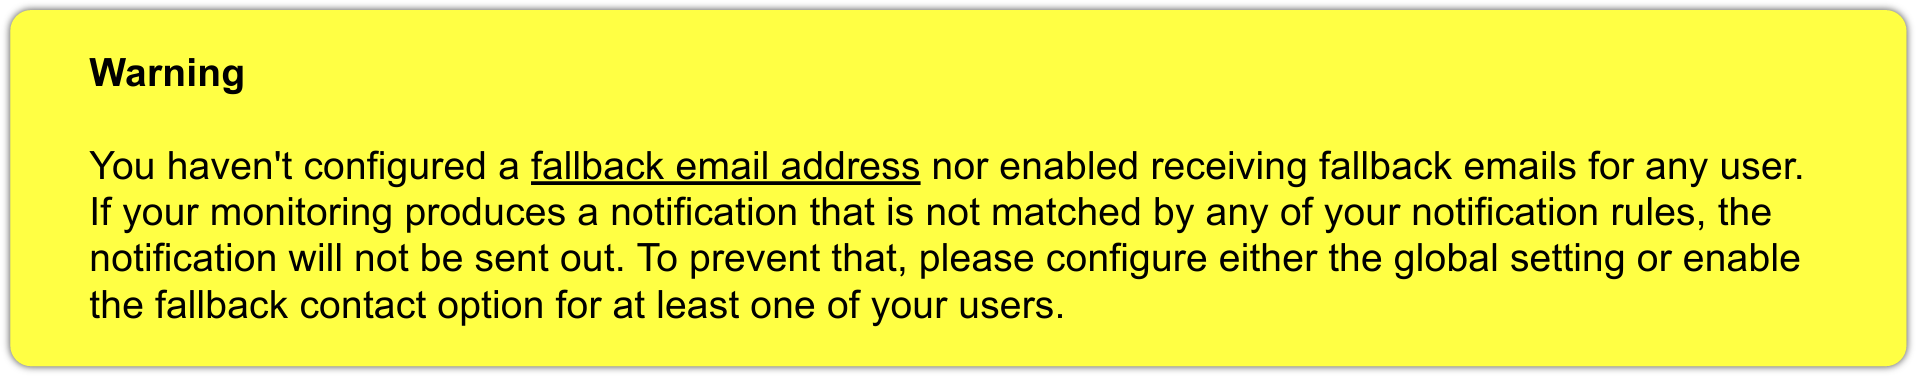 Warning that no fallback email address is stored.